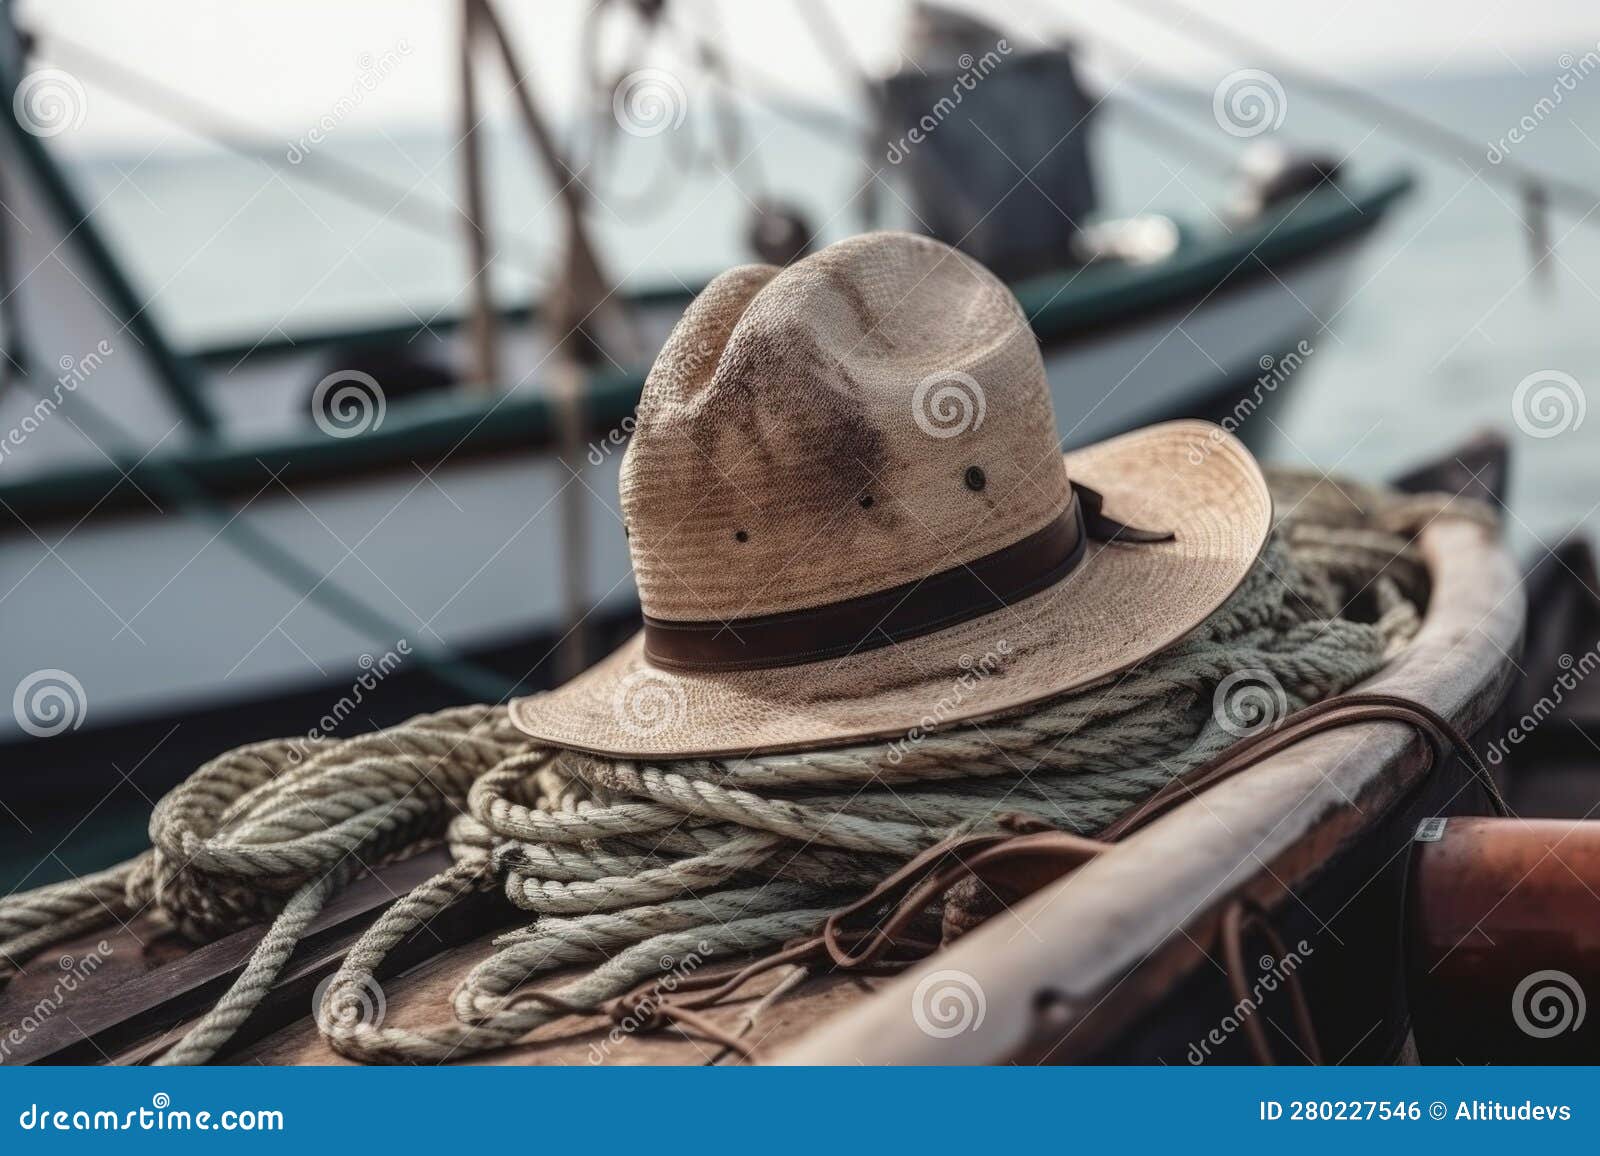 Cowboy Hat and Rope on Fishing Boat, with the Ropes Ready for a Big Catch  Stock Illustration - Illustration of leisure, rope: 280227546